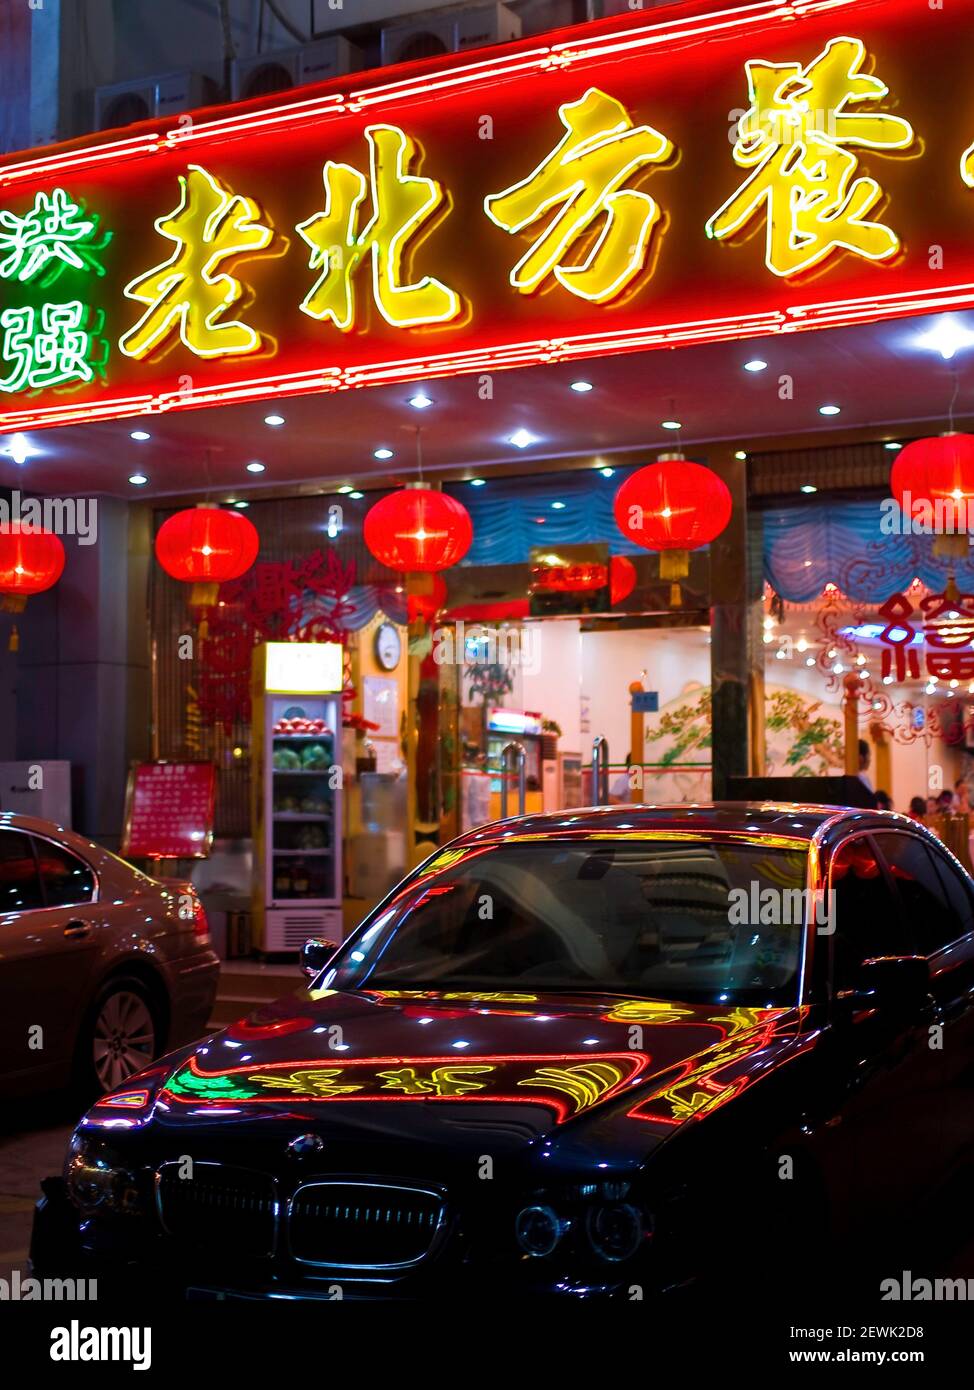 Restaurant Facade with Neon Sign.Shenzhen. (Guangdong) P. R. of China. Stock Photo